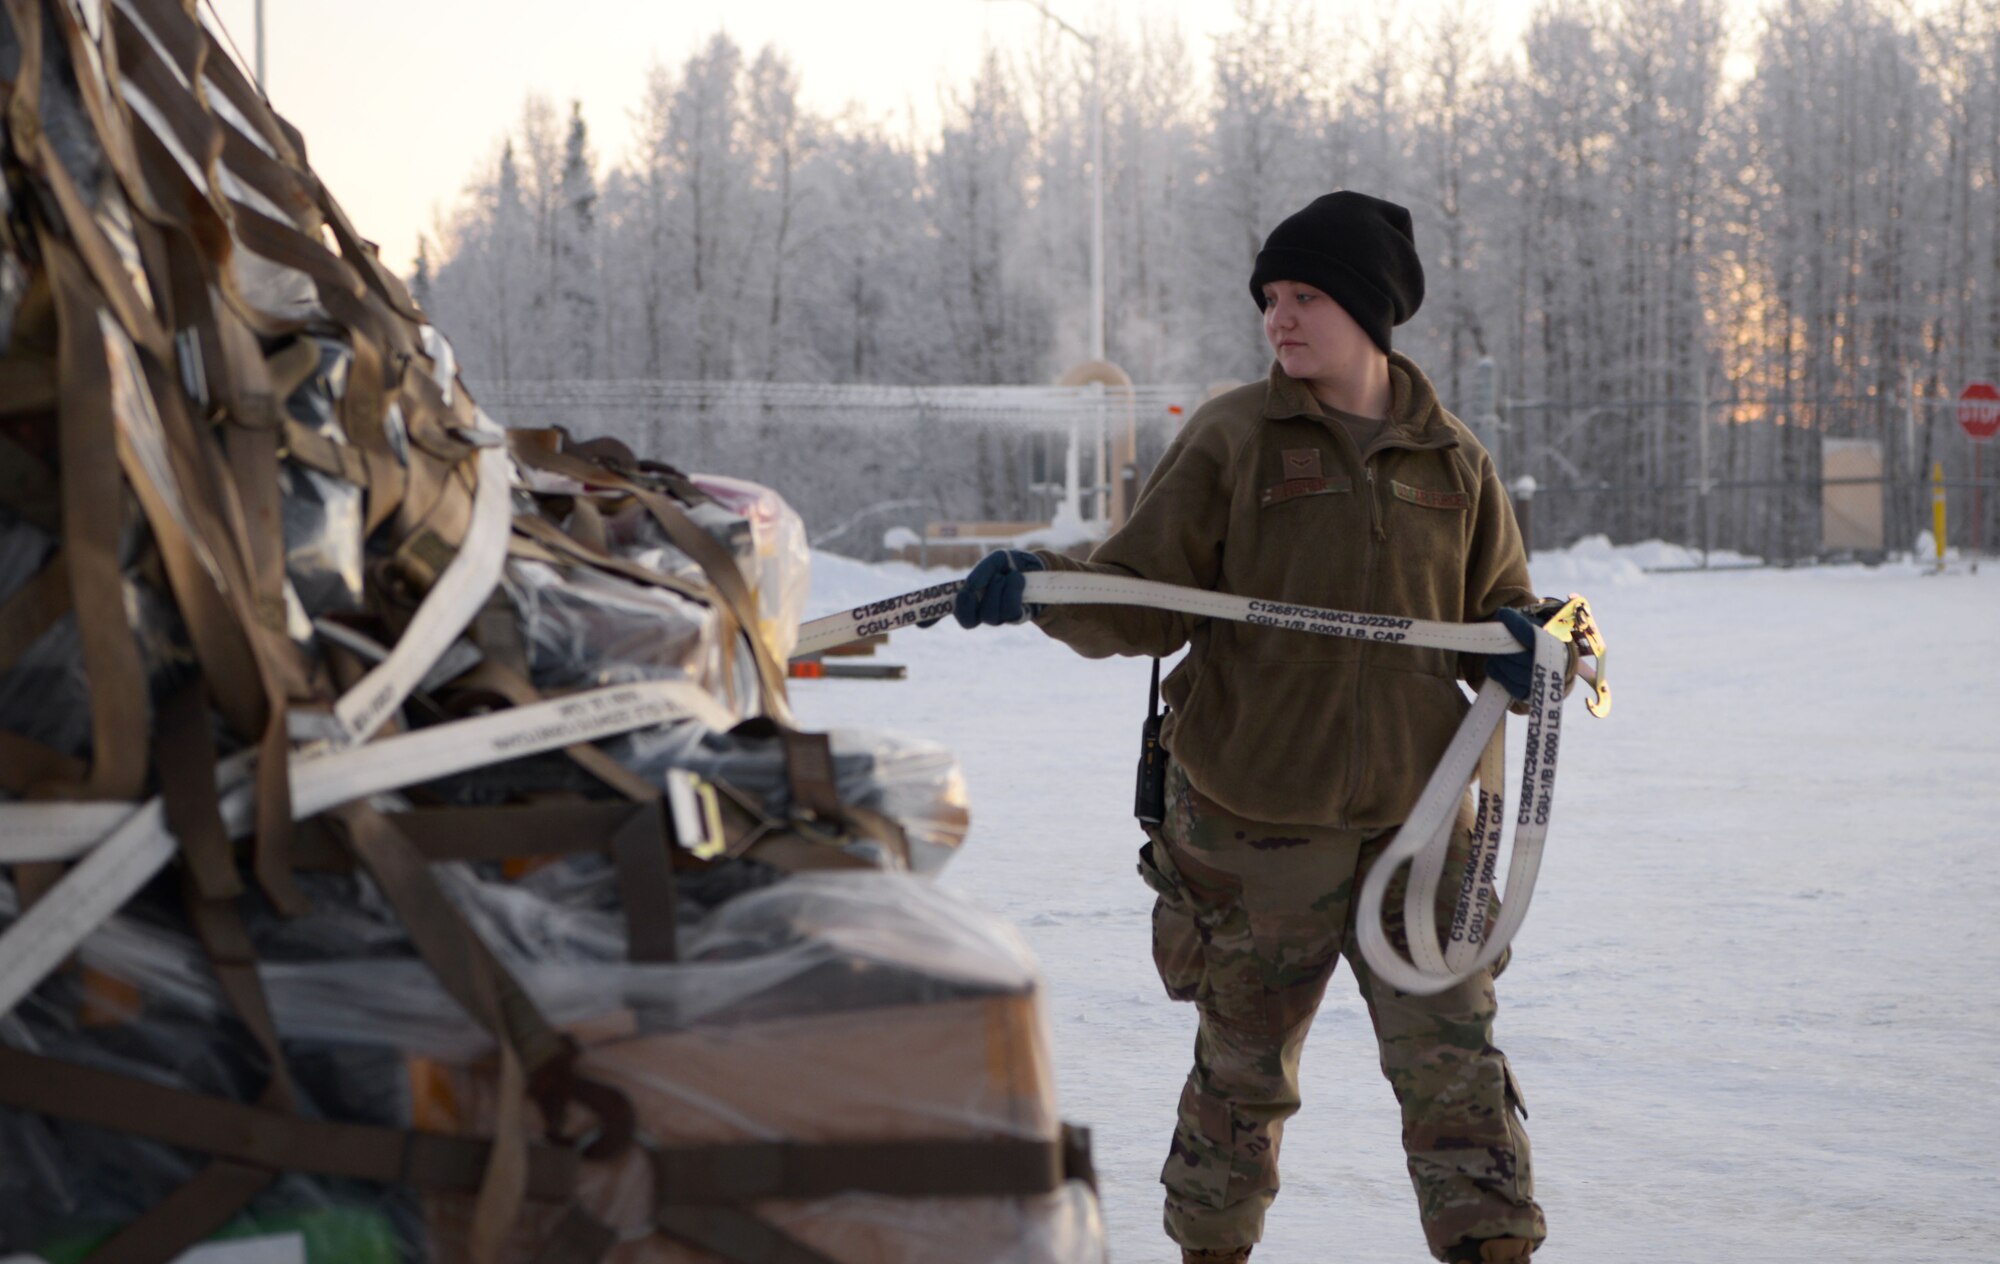 An Airman assigned to the 354th Logistics Readiness Squadron prepares cargo for transport during Arctic Gold 21-1 on Eielson Air Force Base, Alaska, Nov. 18, 2020. Thousands of pounds of equipment and hundreds of Airmen were ready to deploy alongside 12 F-35 Lightning II at a moment's notice. (U.S. Air Force photo by Senior Airman Beaux Hebert)